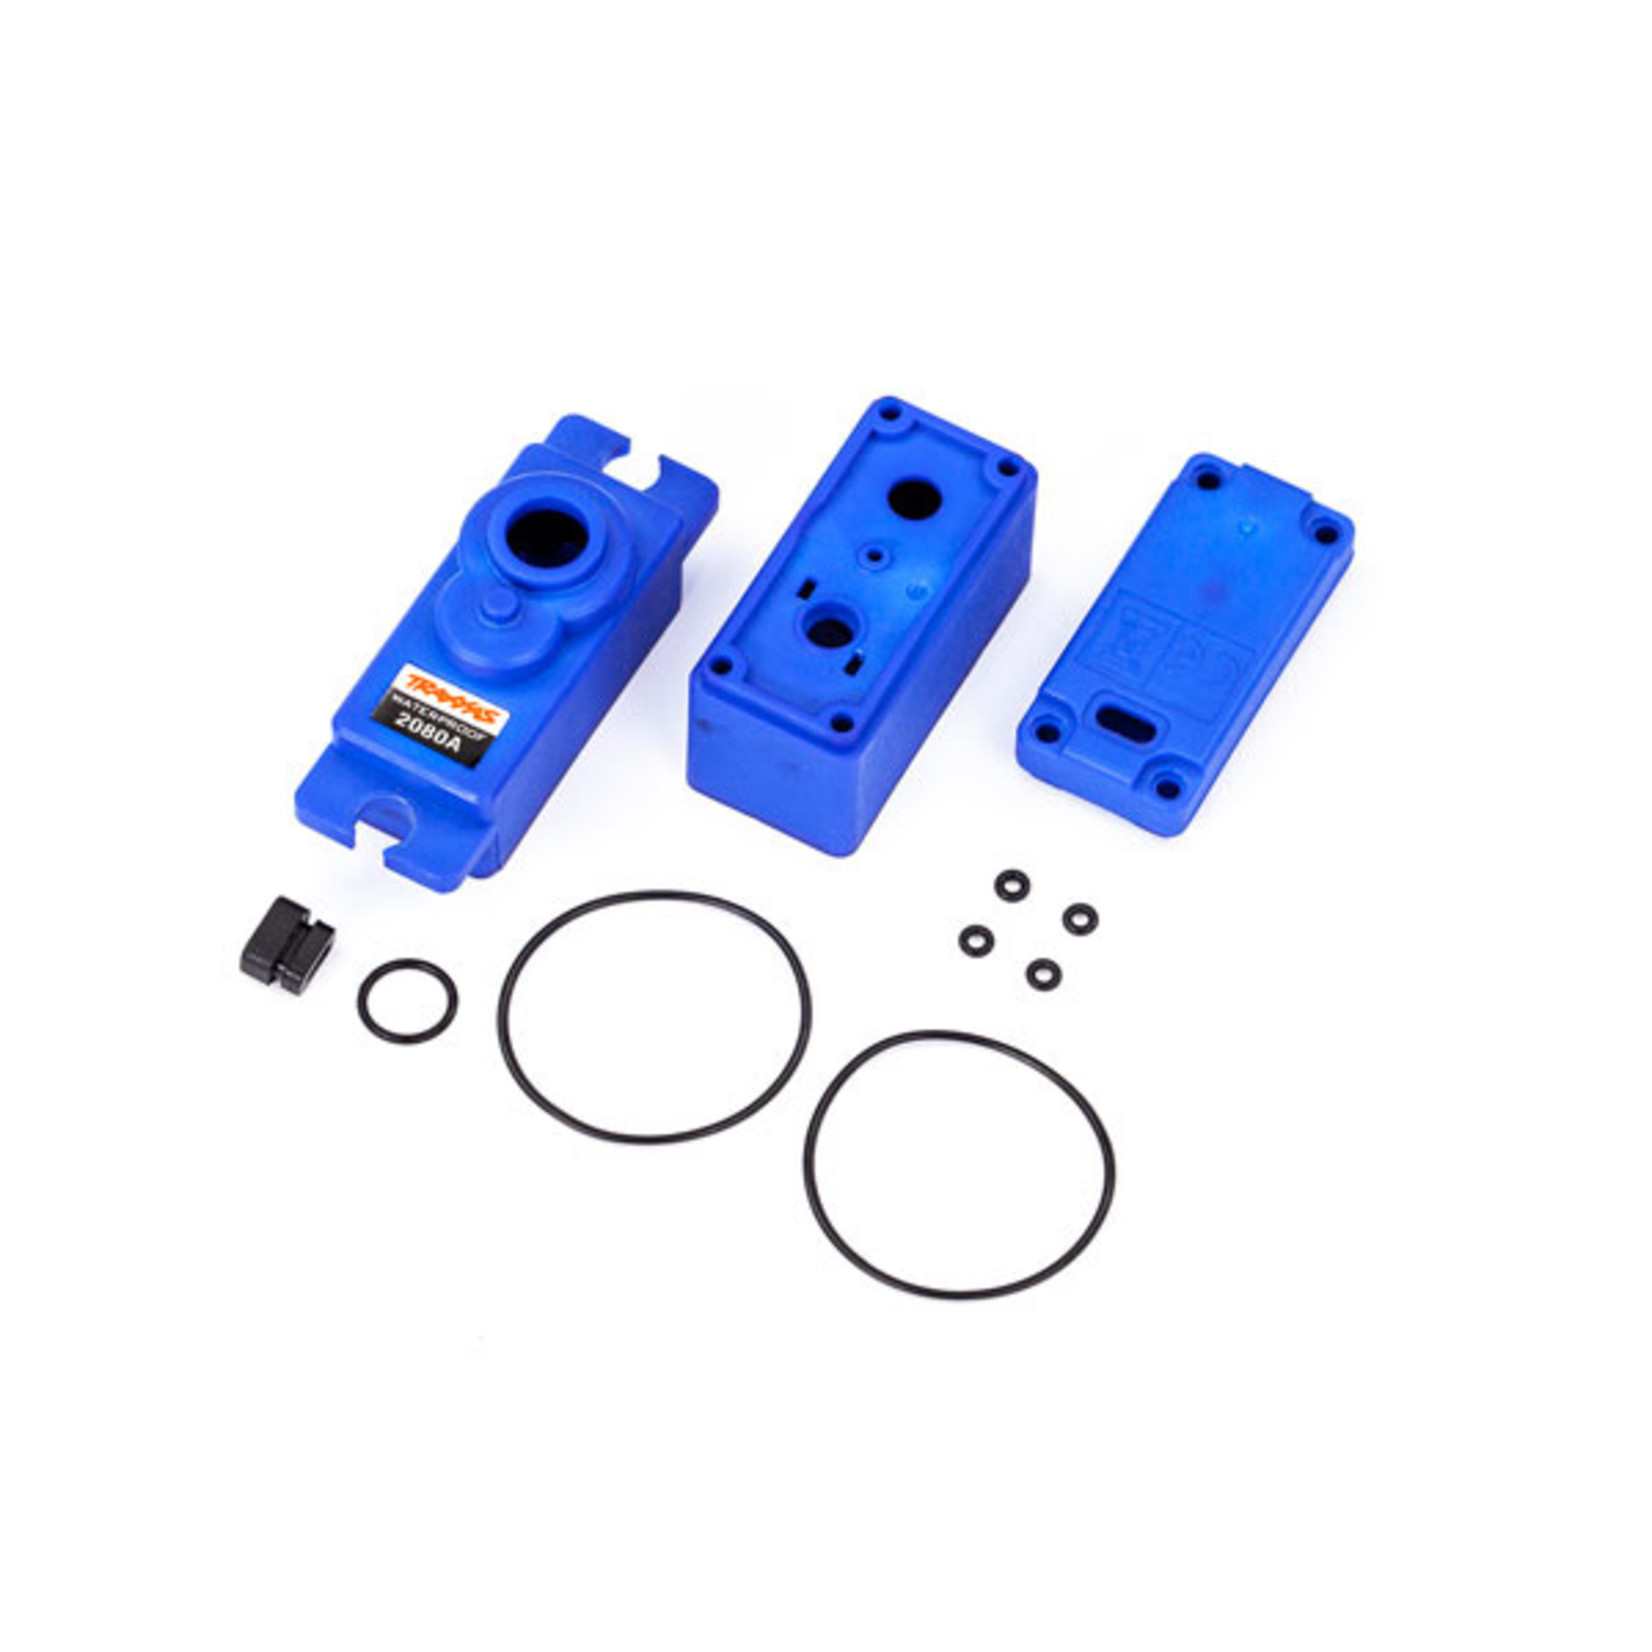 Traxxas 2081A - Servo case/ gaskets (for 2080A micro water